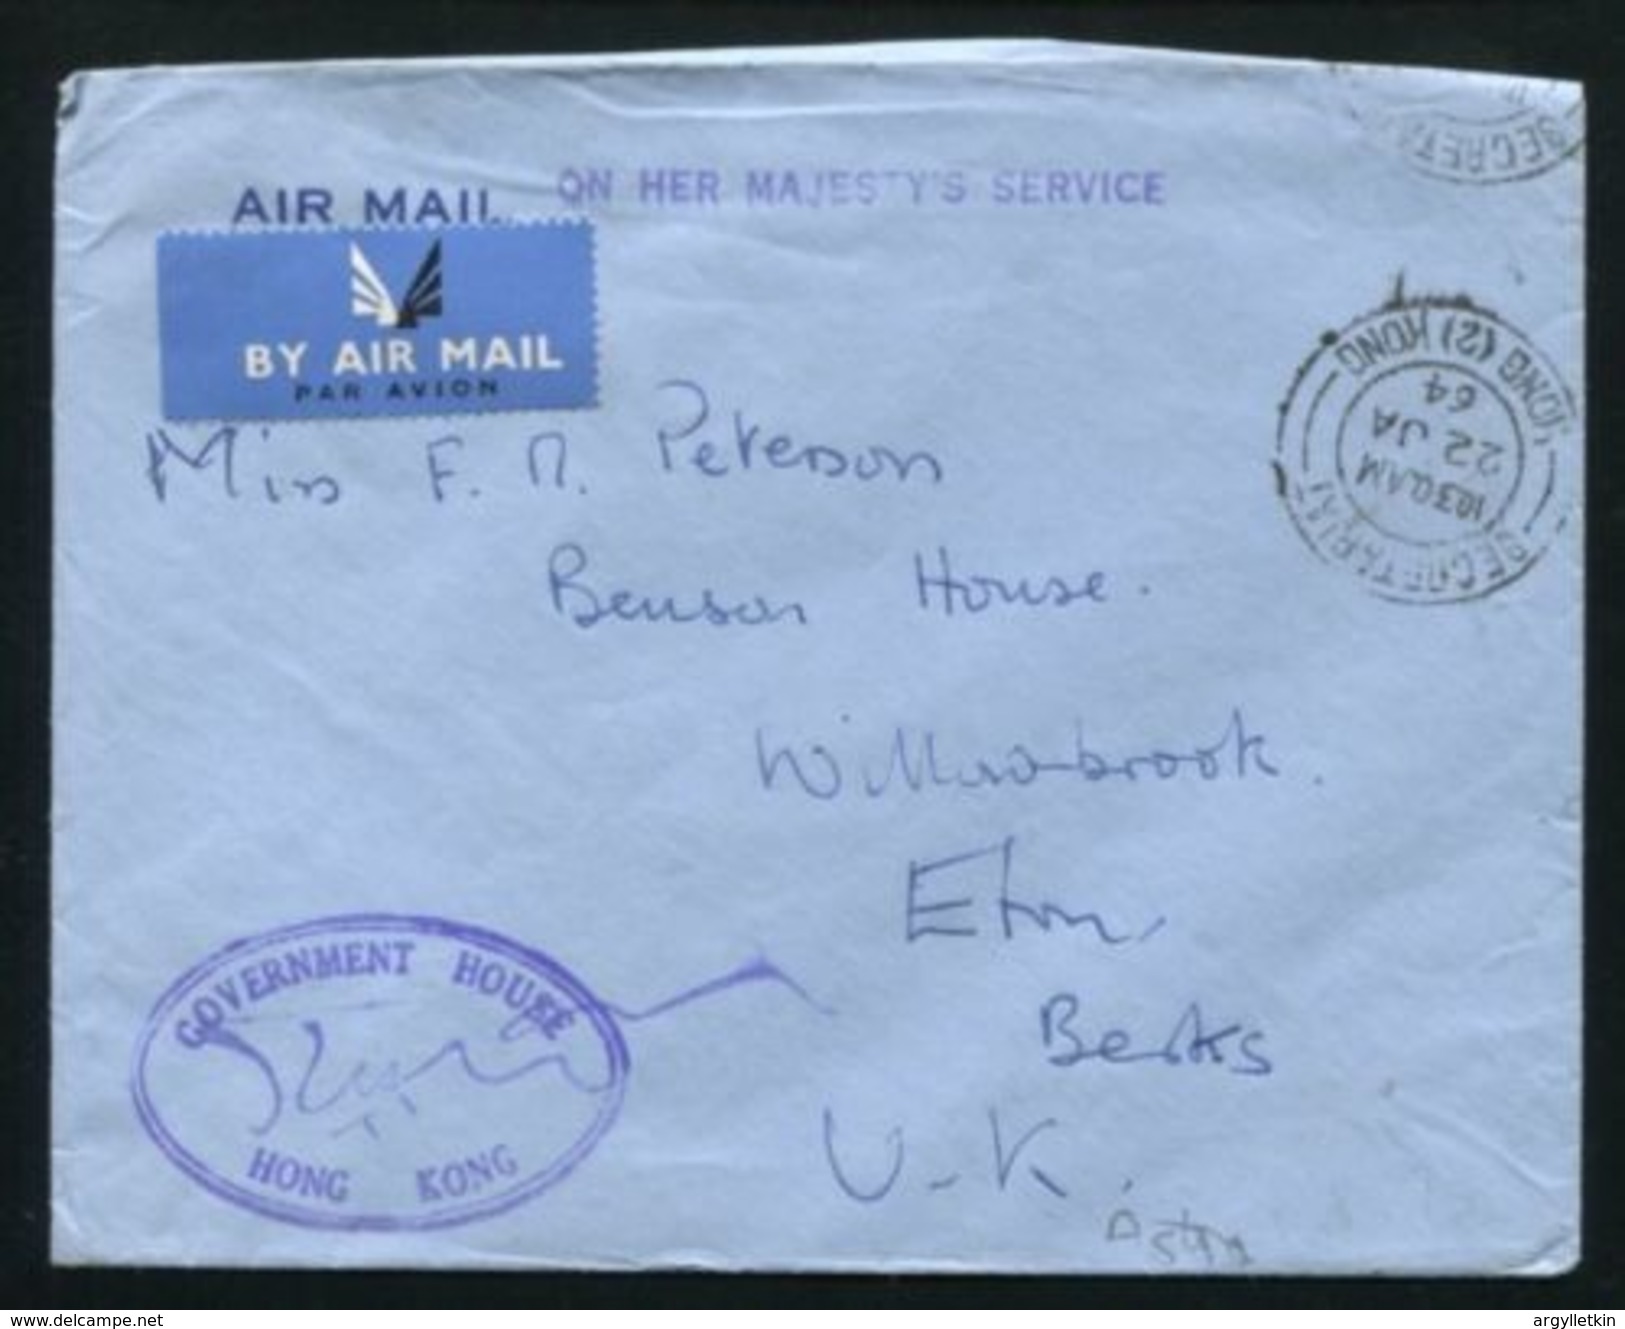 HONG KONG OHMS GOVERNMENT HOUSE ON ASTRA AIRMAIL ENVELOPE 1964 - Briefe U. Dokumente